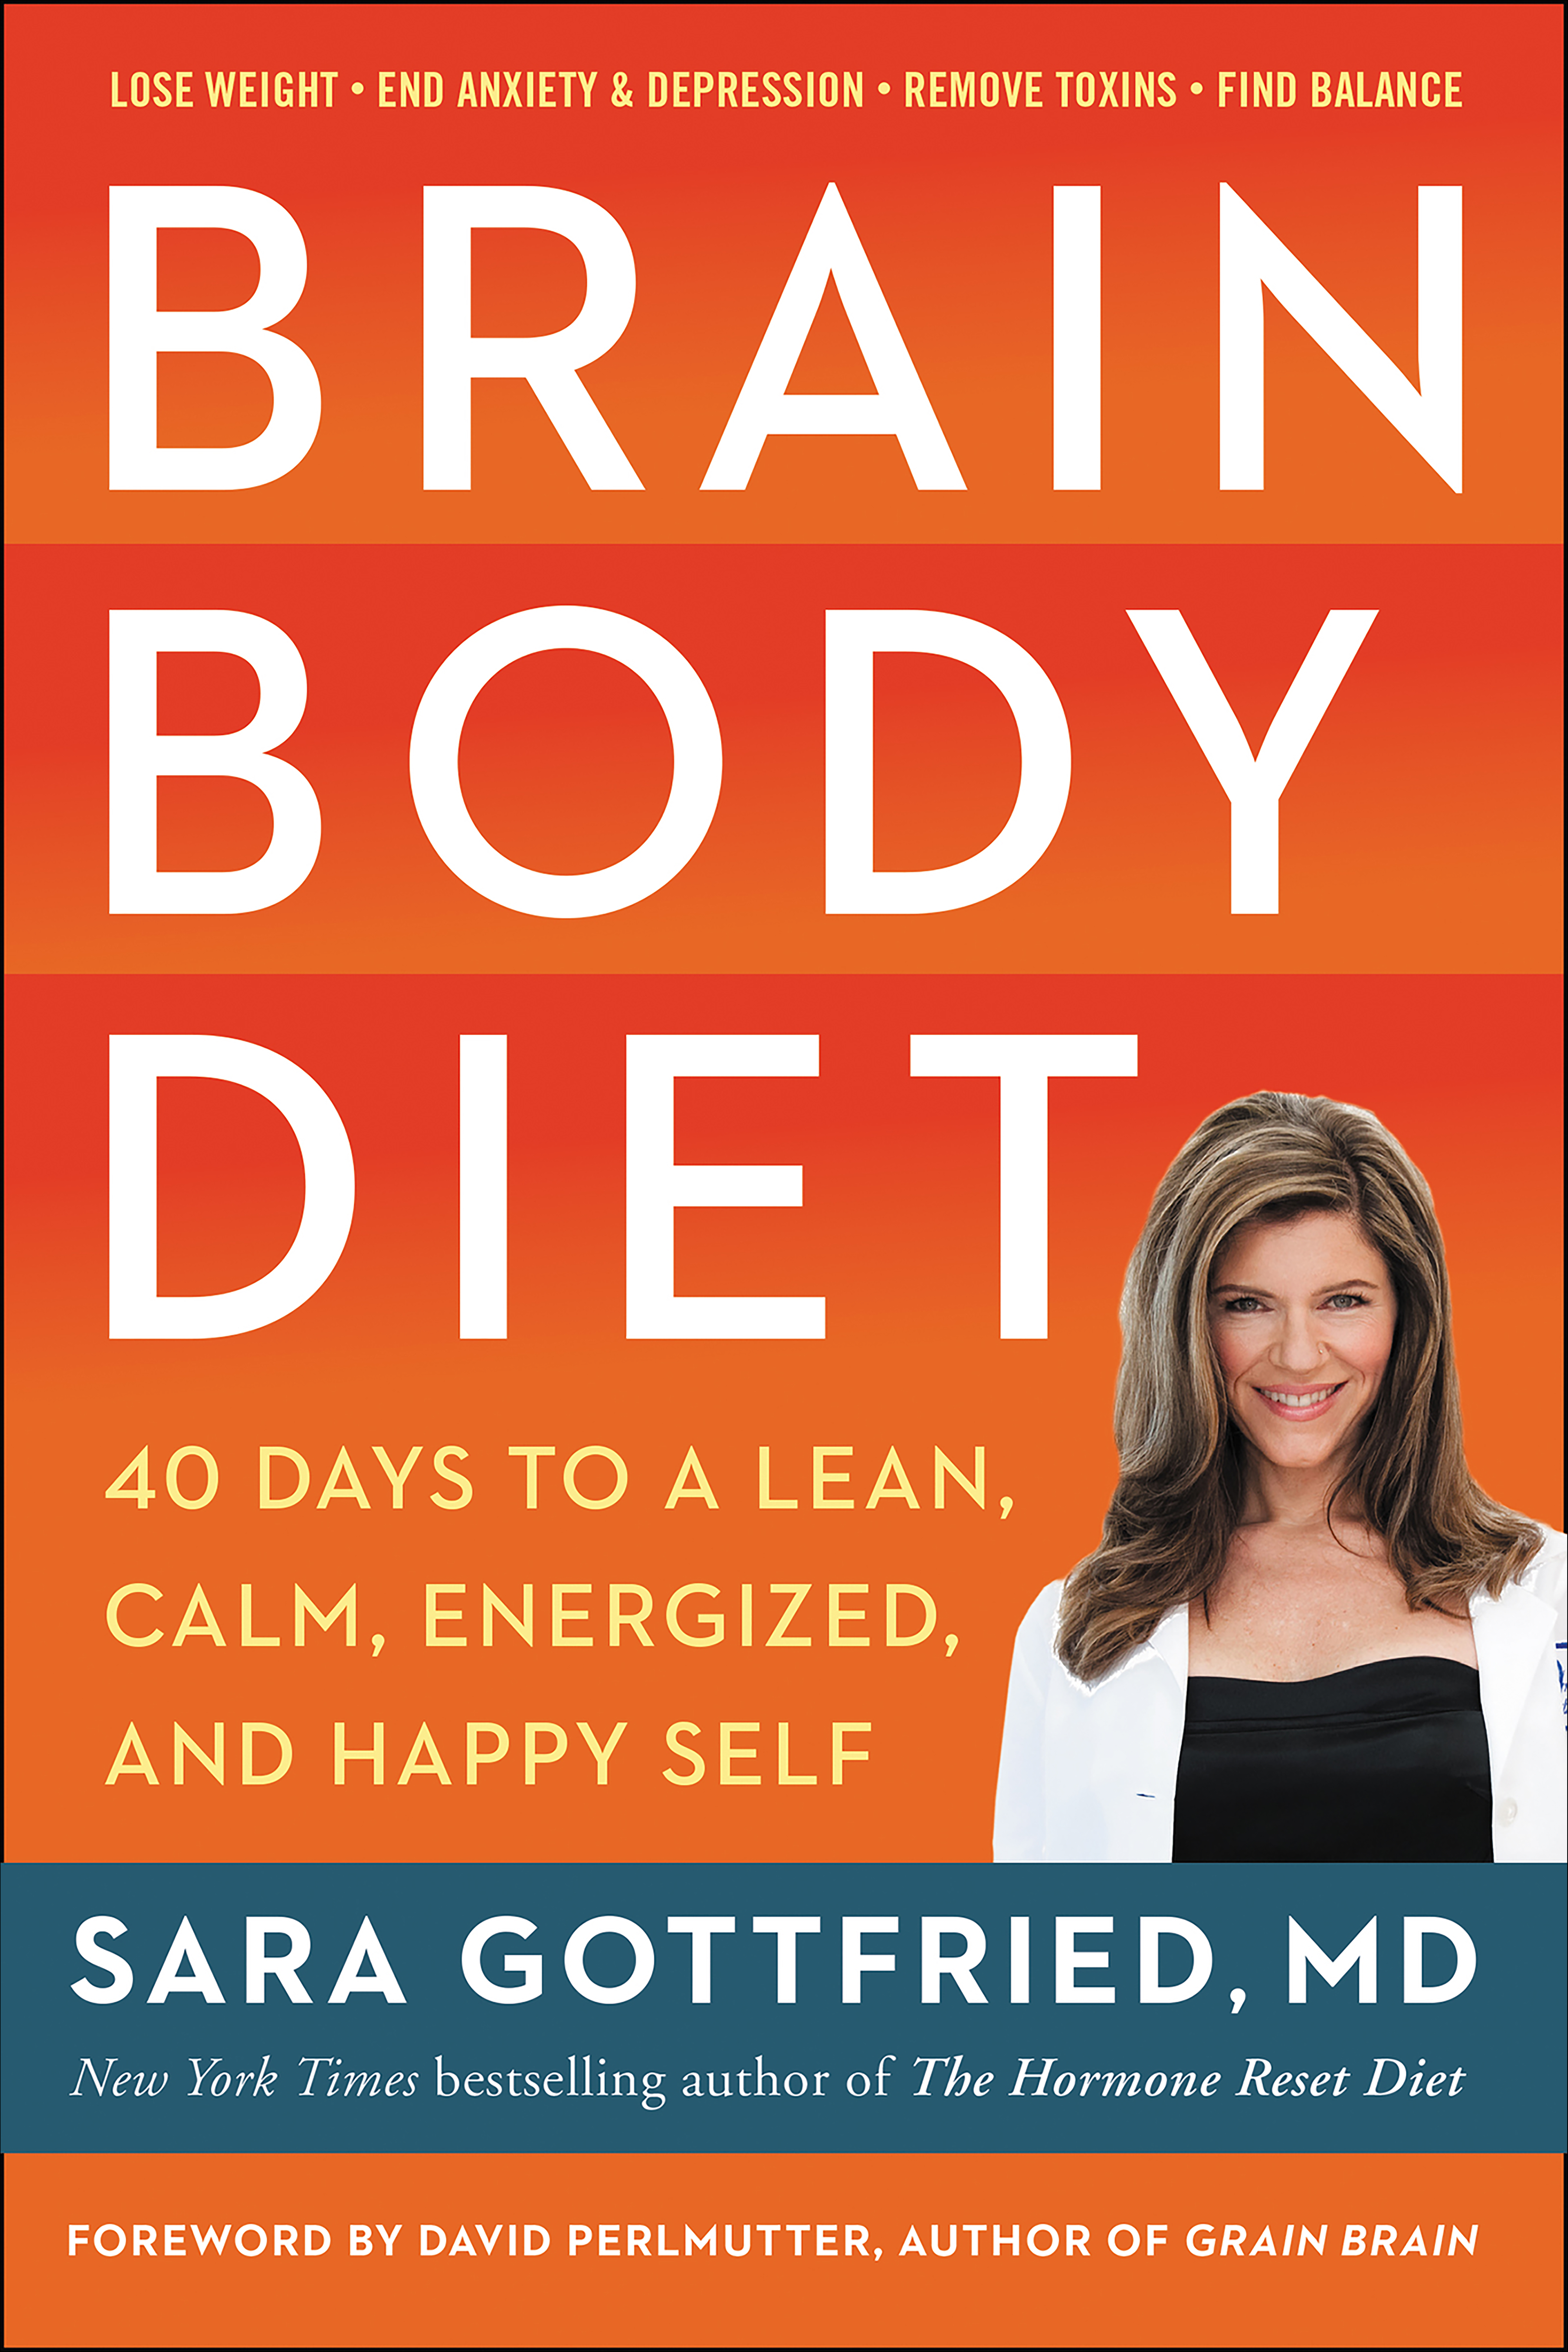 Brain body diet 40 days to a lean, calm, energized, and happy self cover image